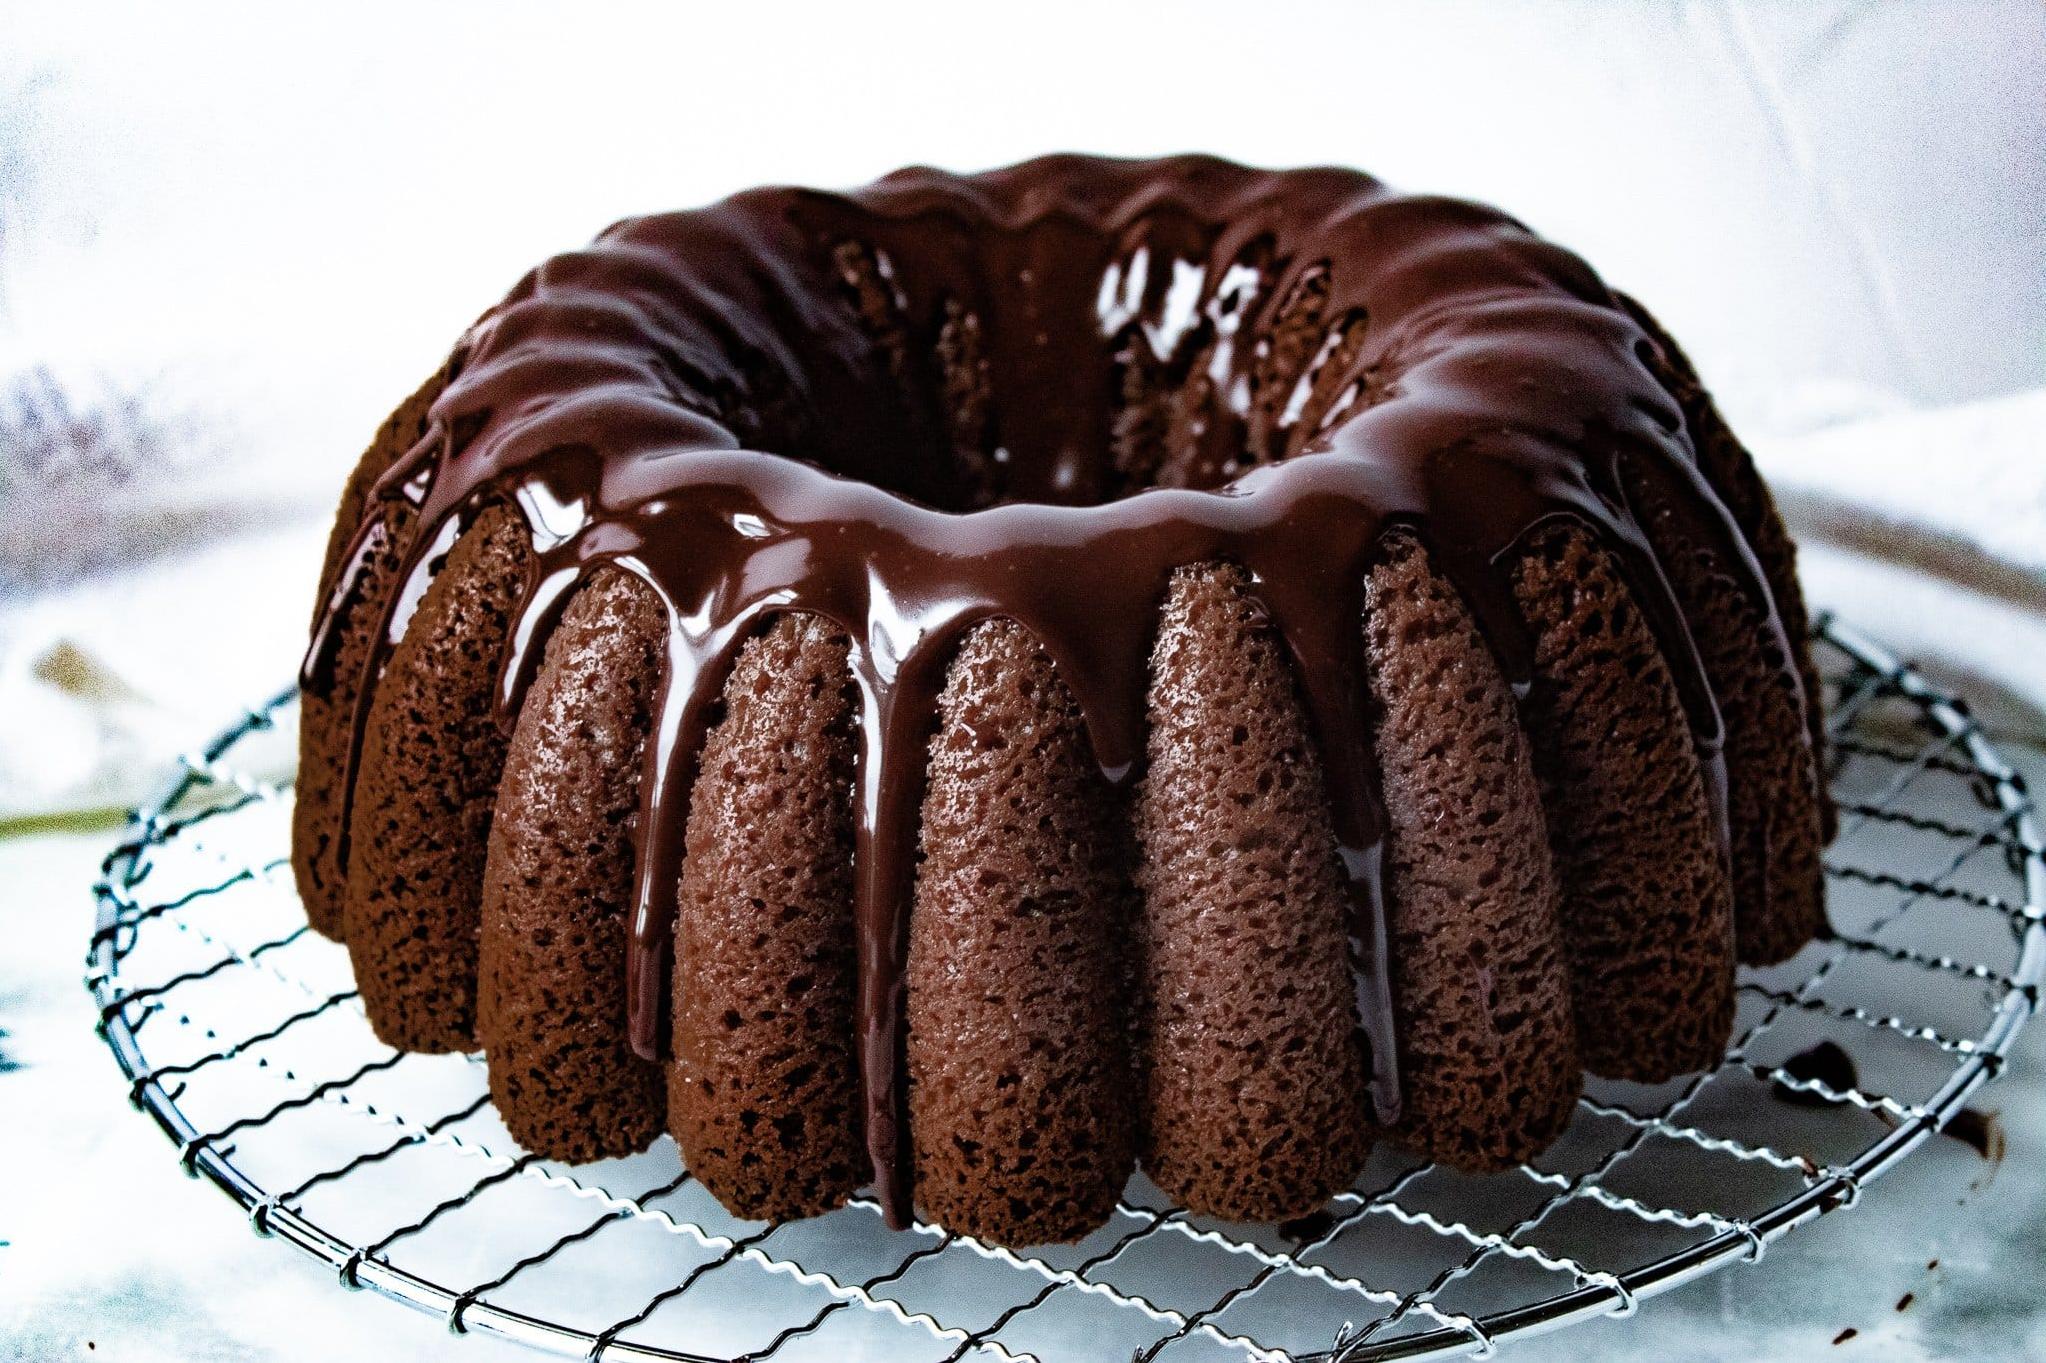  Satisfy your chocolate cravings with this Deep Chocolate Sour Cream Pound Cake!